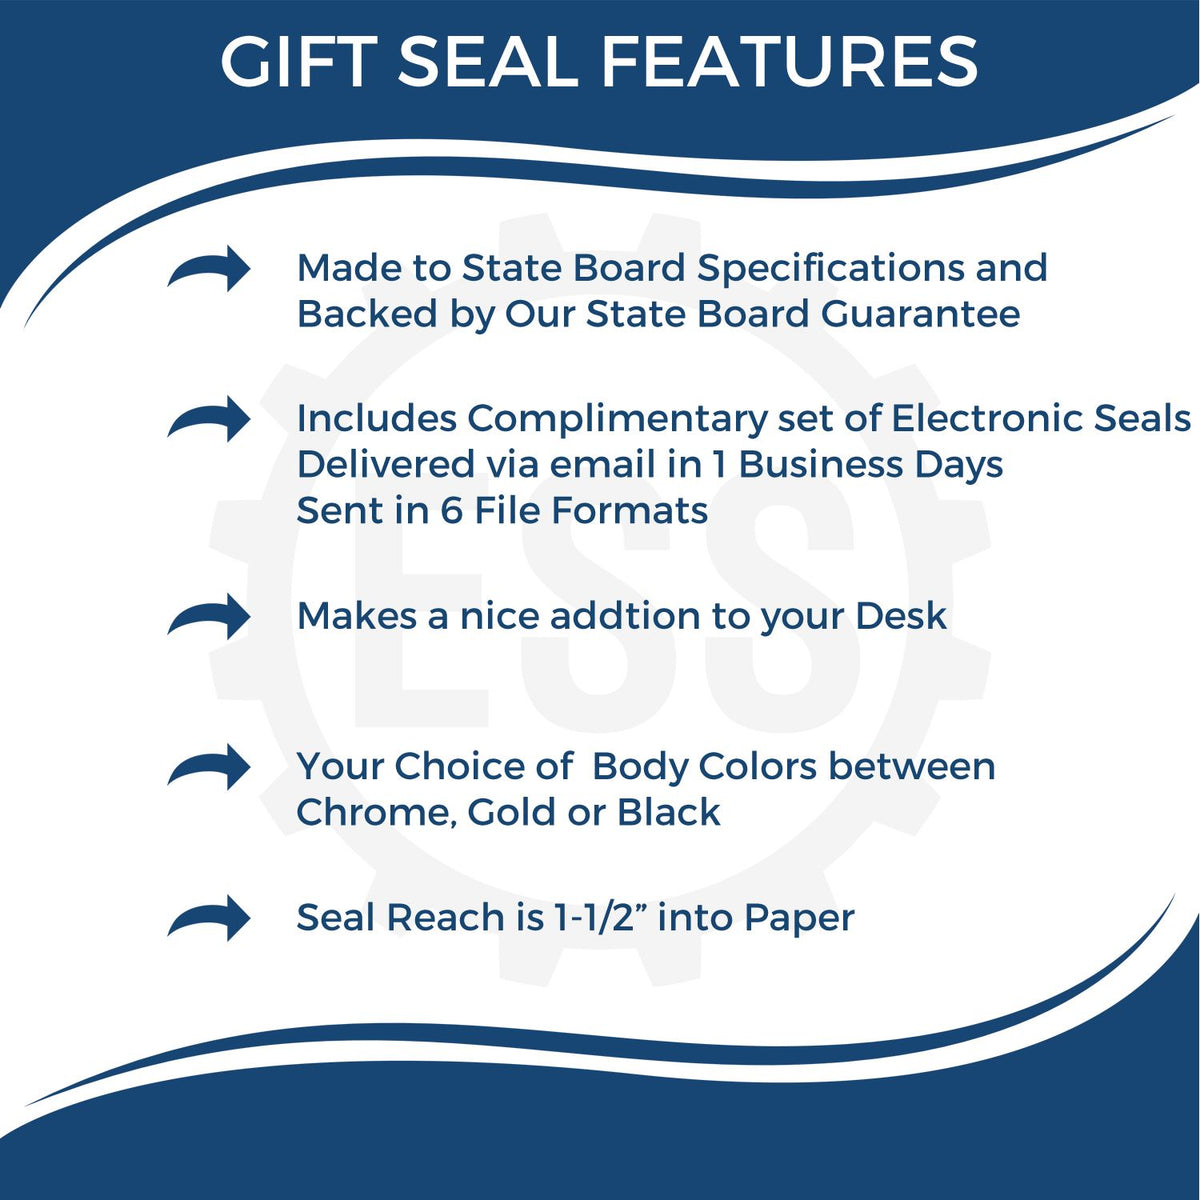 A picture of an infographic highlighting the selling points for the Gift Arizona Engineer Seal